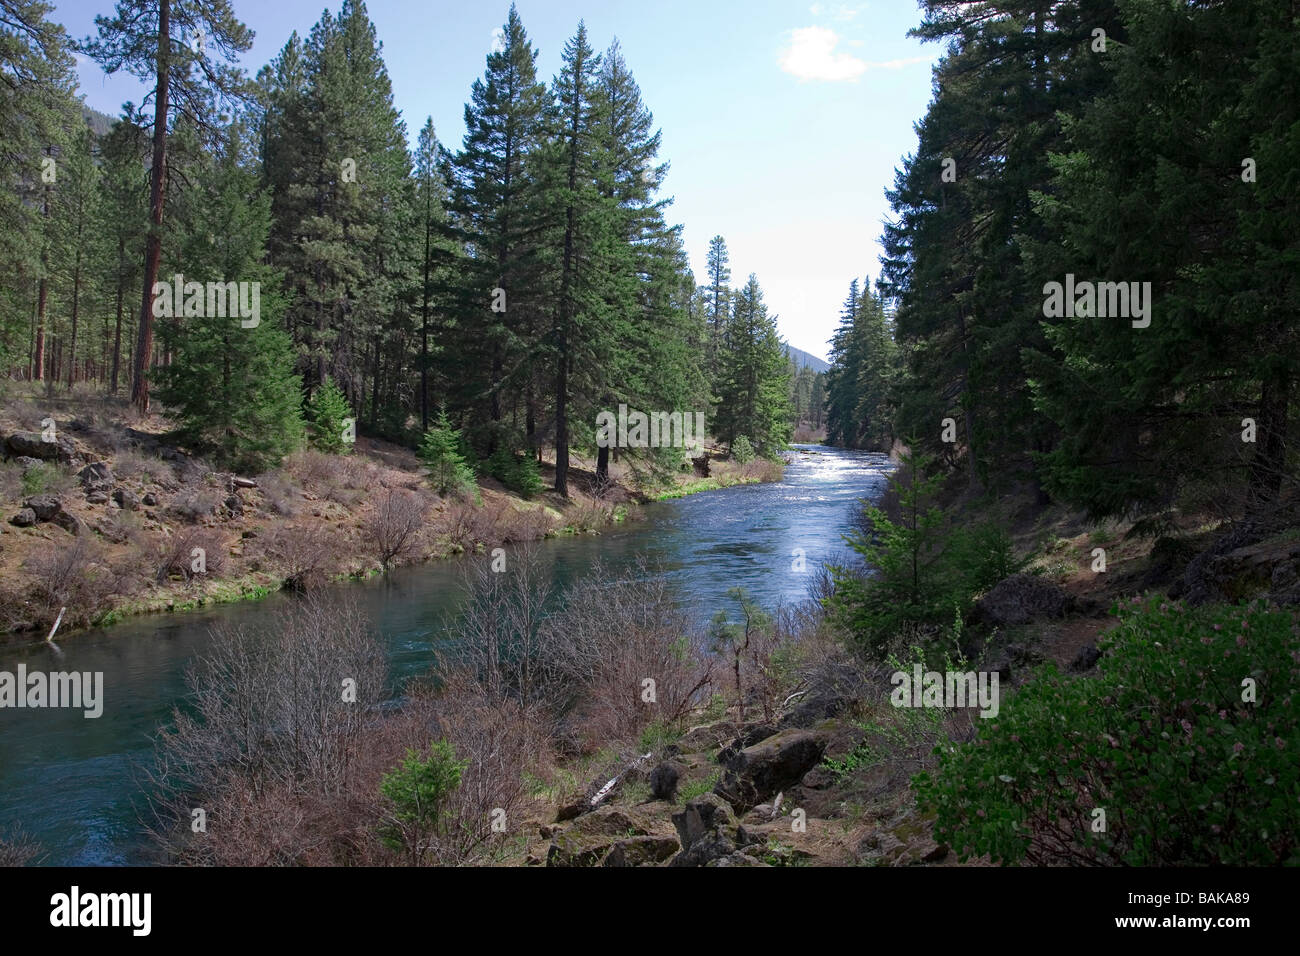 USA OREGON A view of the ponderosa pine along the Metolius River in the Cascade Mountains of central Oregon Stock Photo